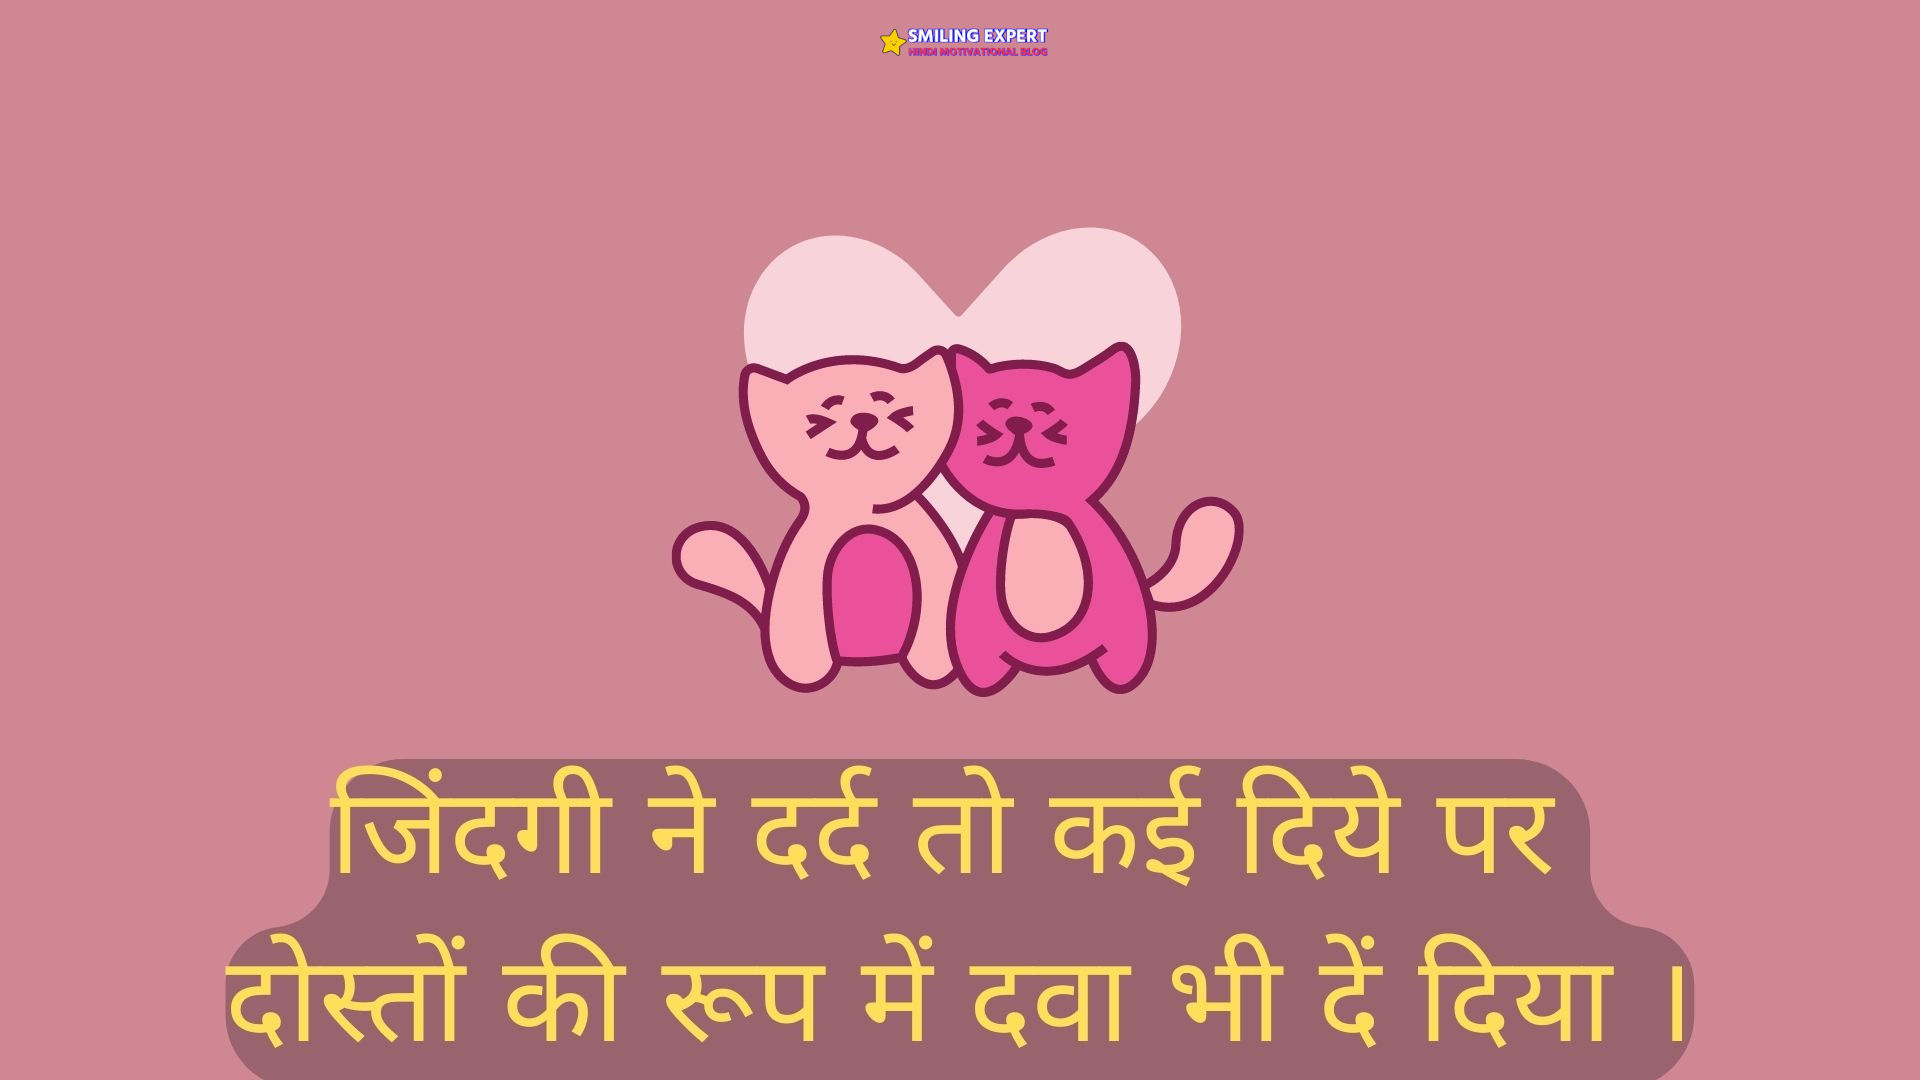 best friend quote in hindi 